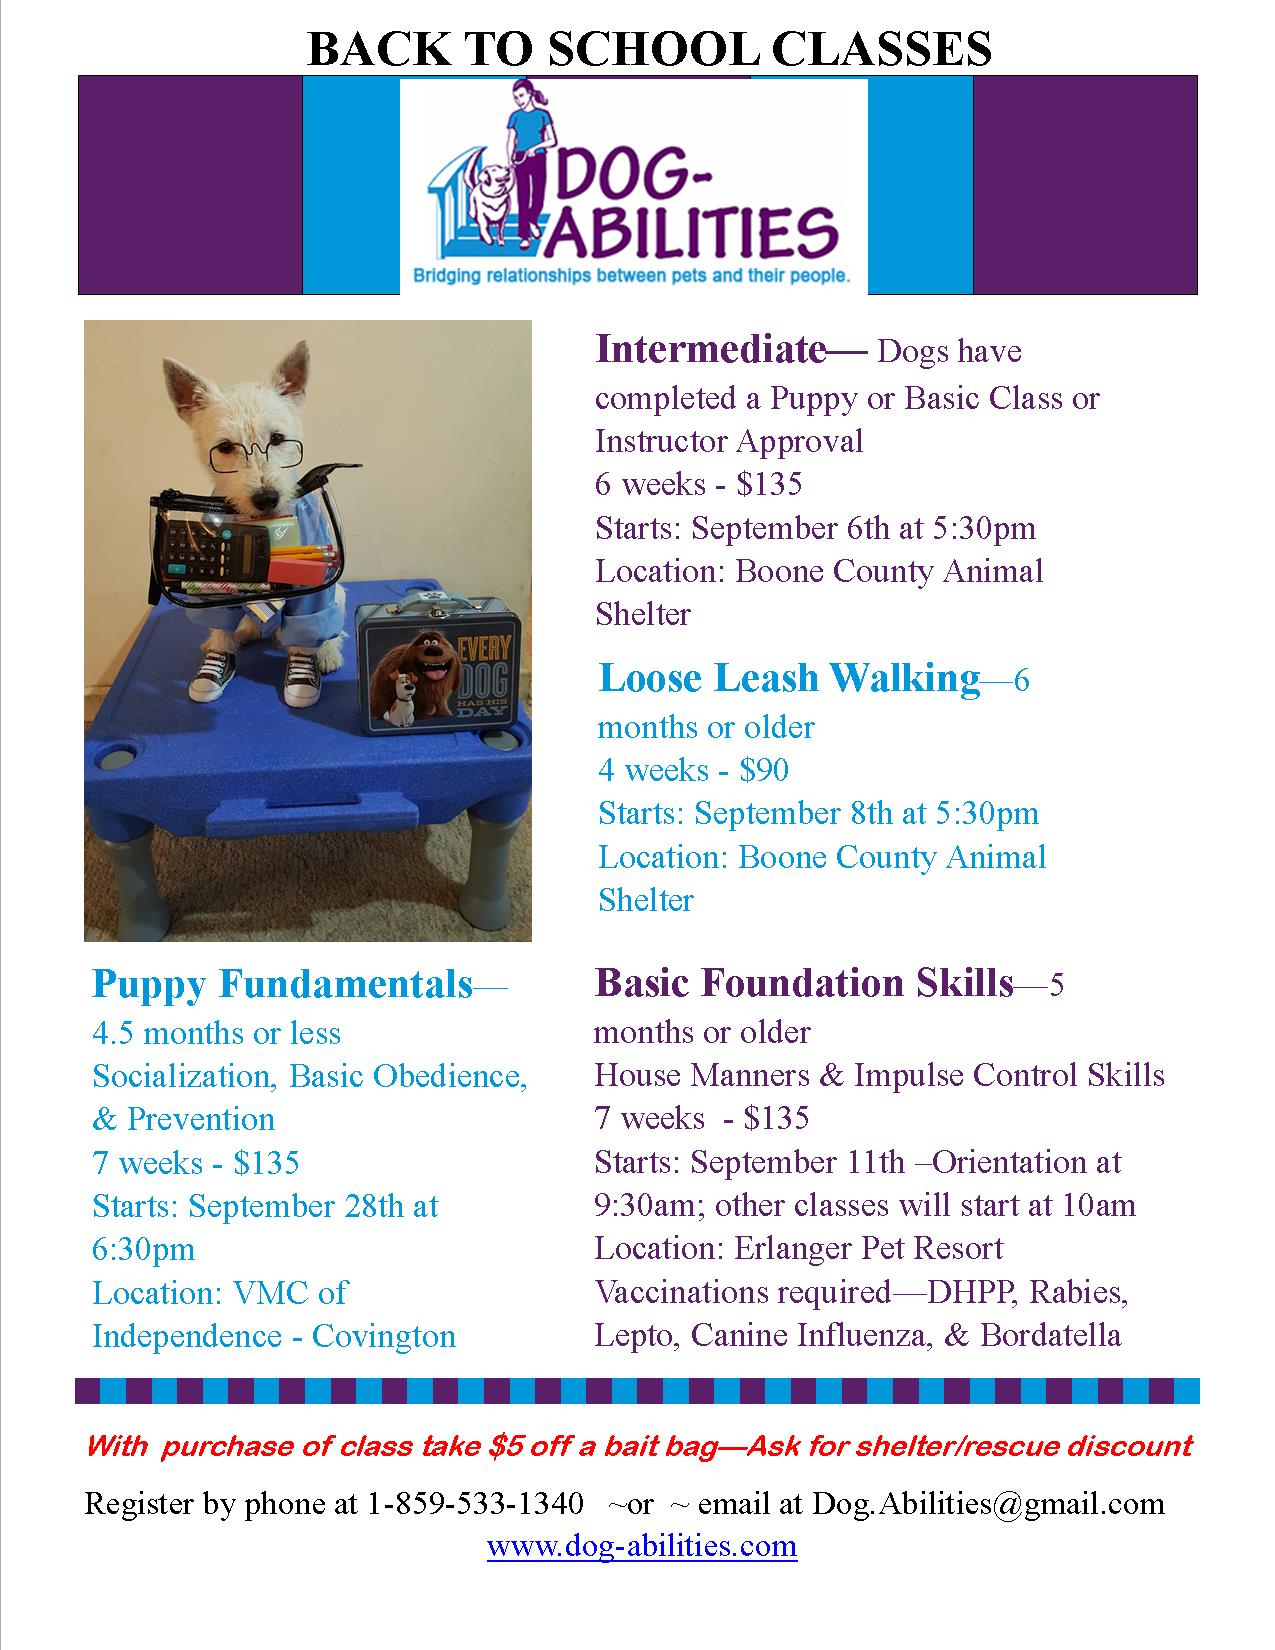 Dog-Abilities classes - Back to school 2016